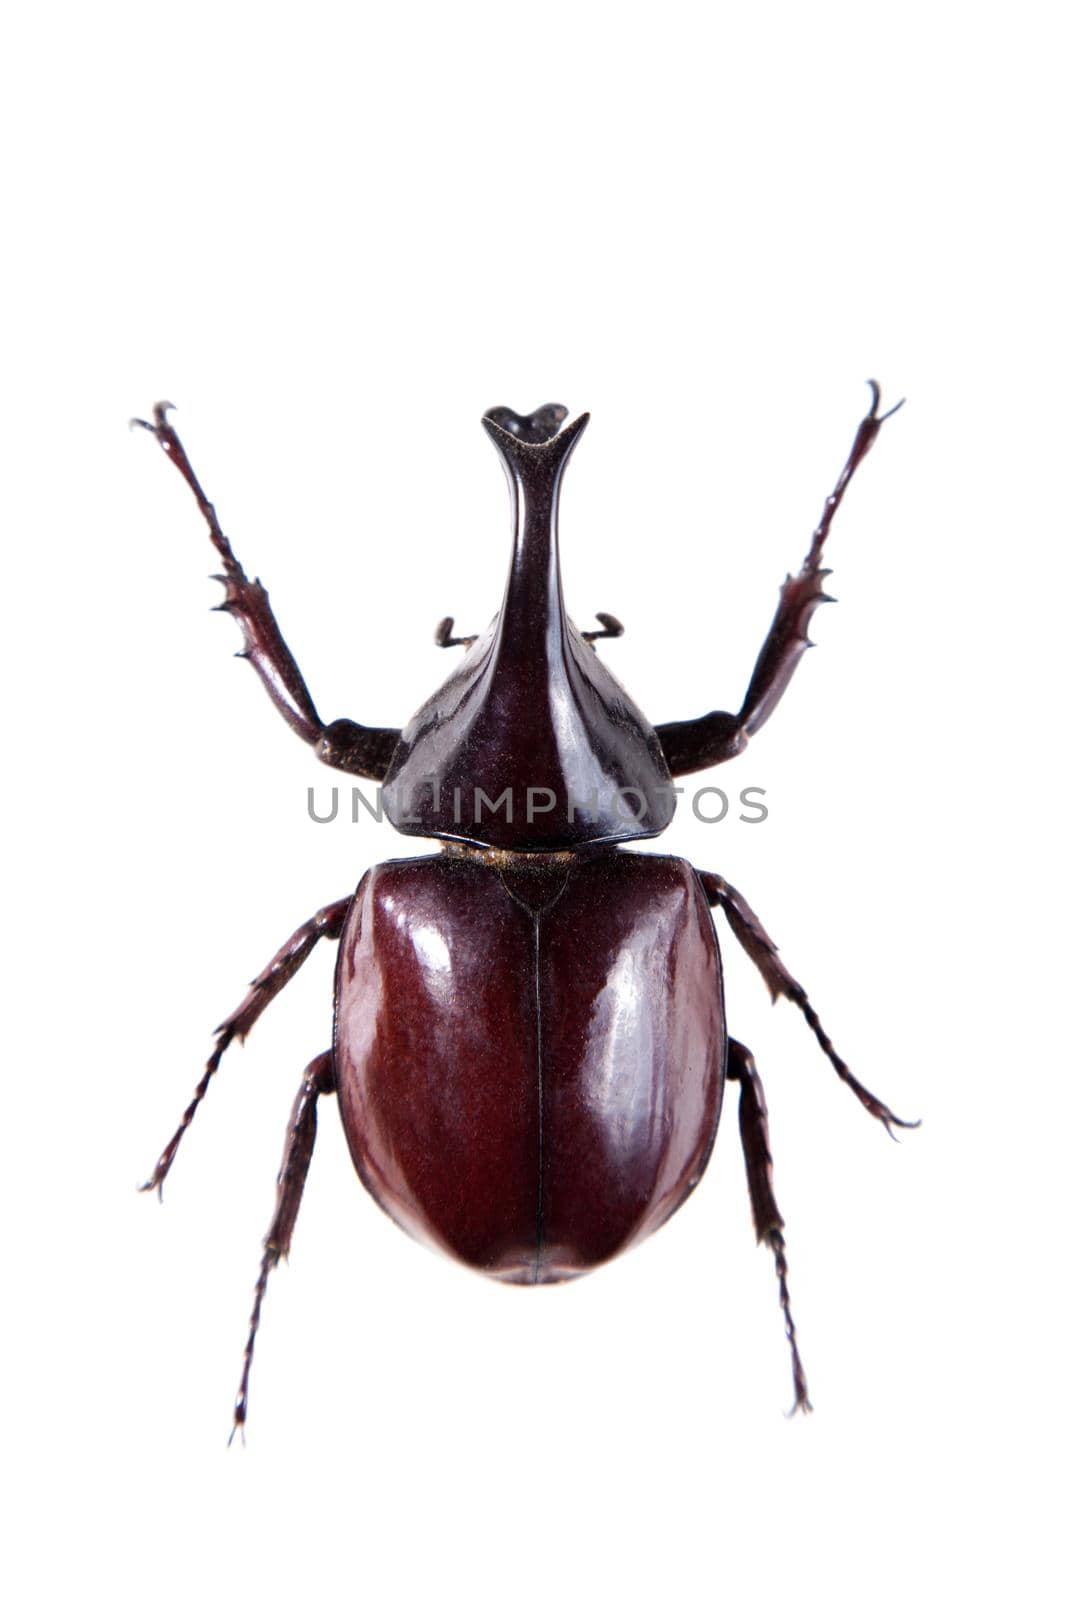 Rhinoceros beetle in museum isolated on the white background